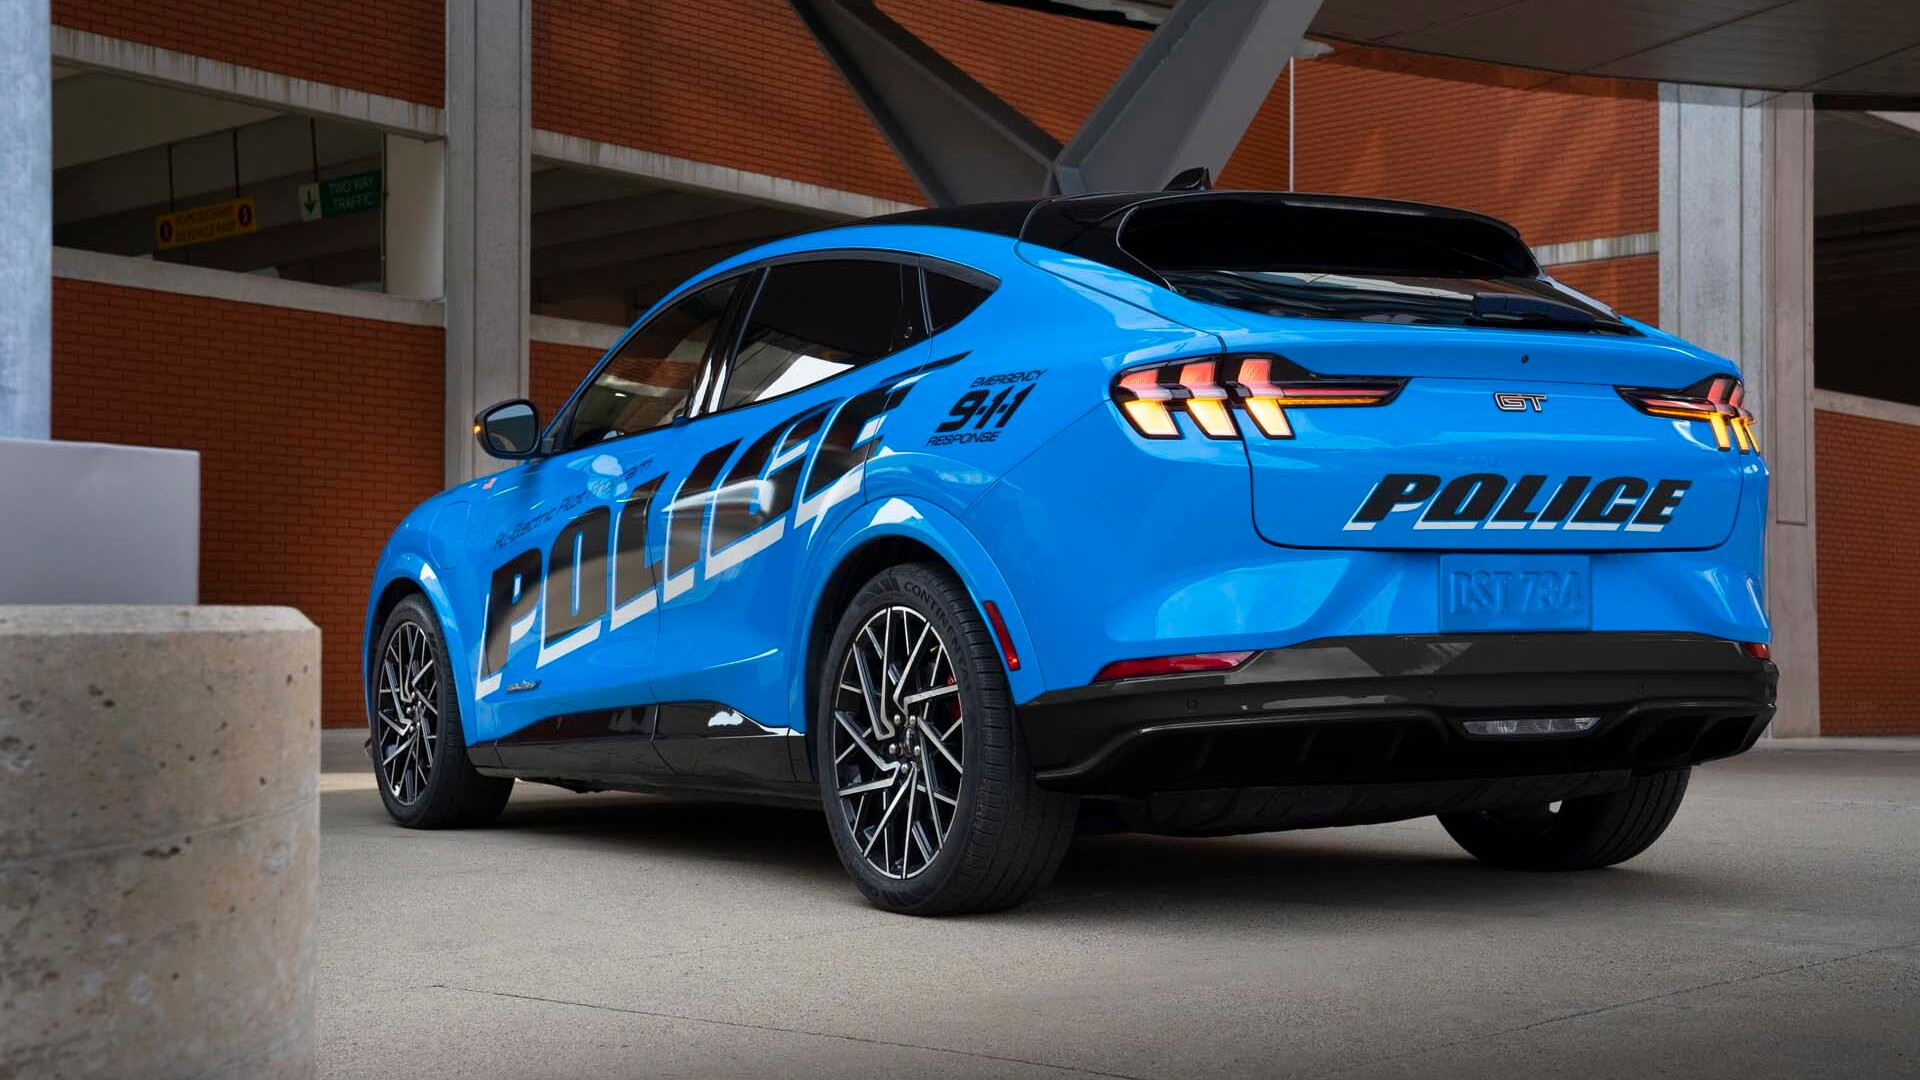 2021 Ford Mustang Mach-E police pilot vehicle